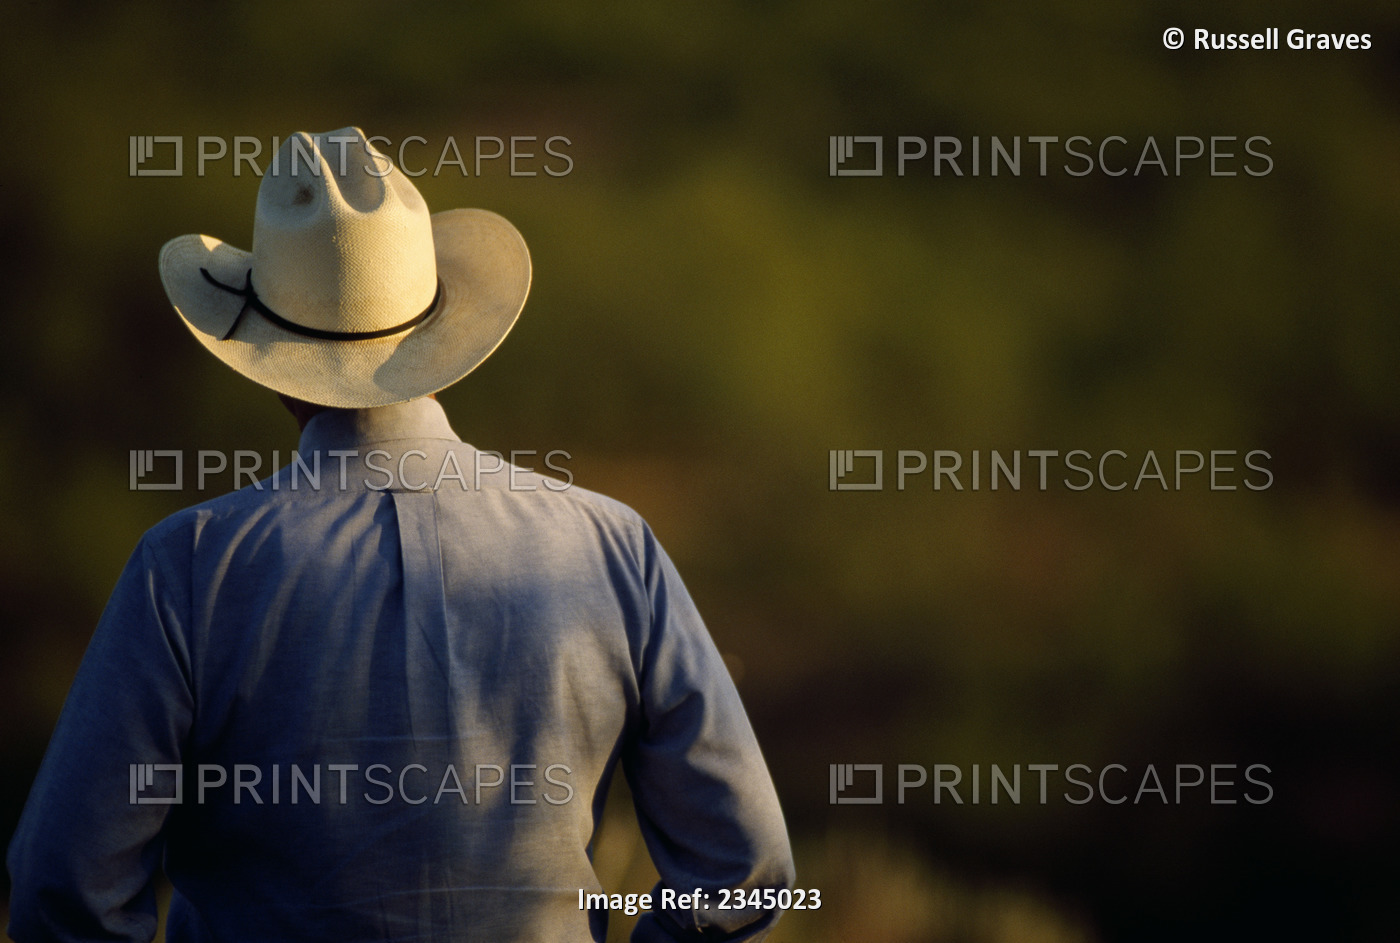 Agriculture - View of a cowboy from behind / Cee Vee, Texas, USA.